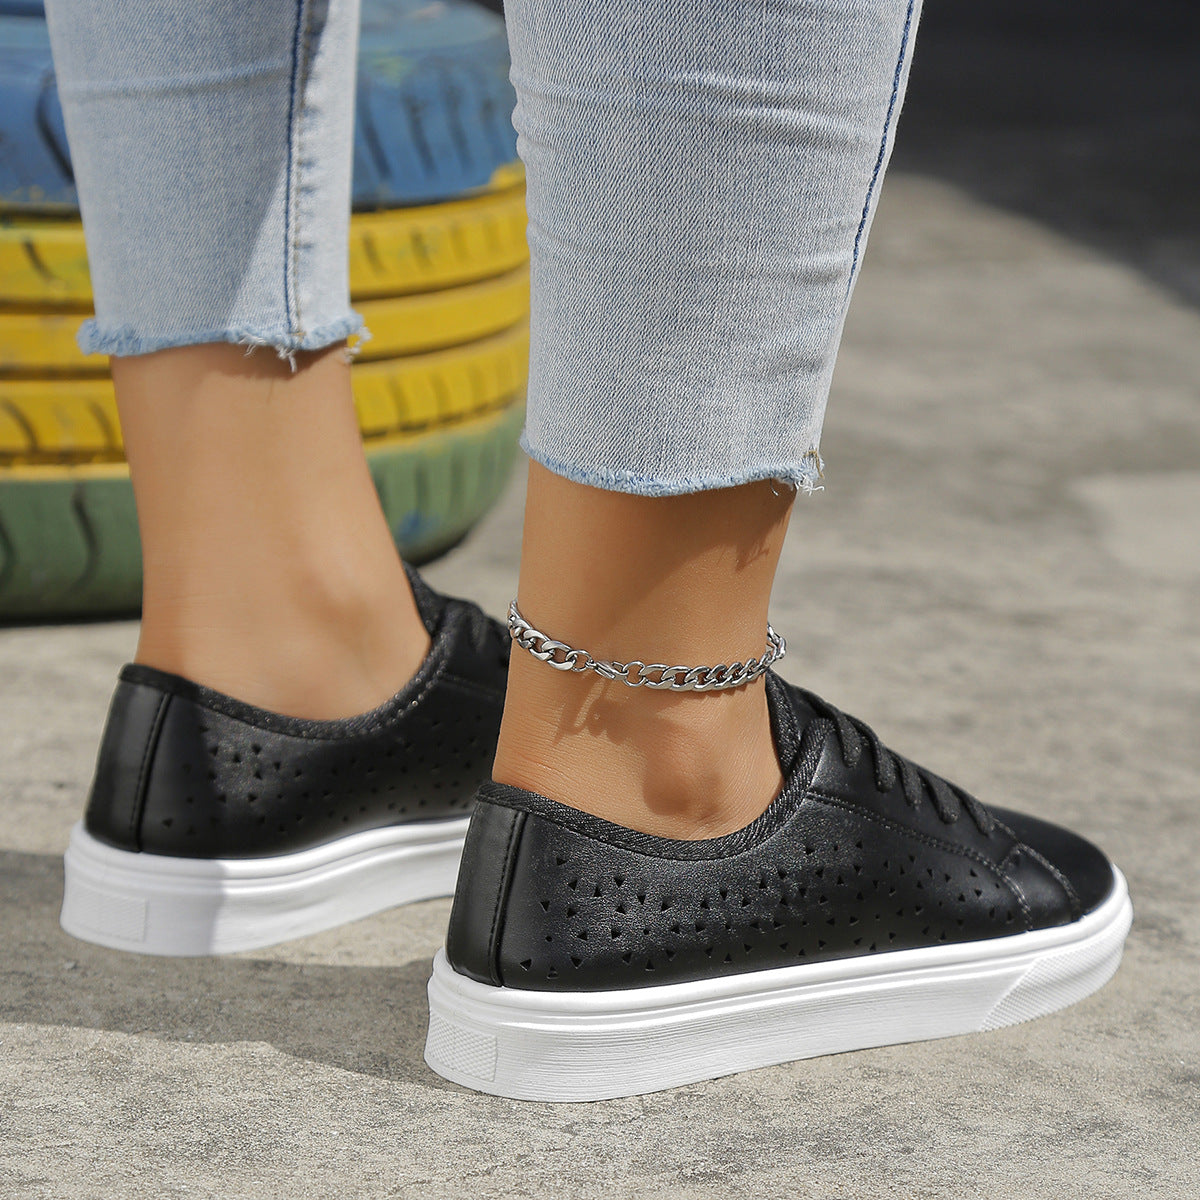 sneakers  | Cutout Flat Shoes Lace-up Hollow Out Walking Shoes For Women Loafers | [option1] |  [option2]| thecurvestory.myshopify.com